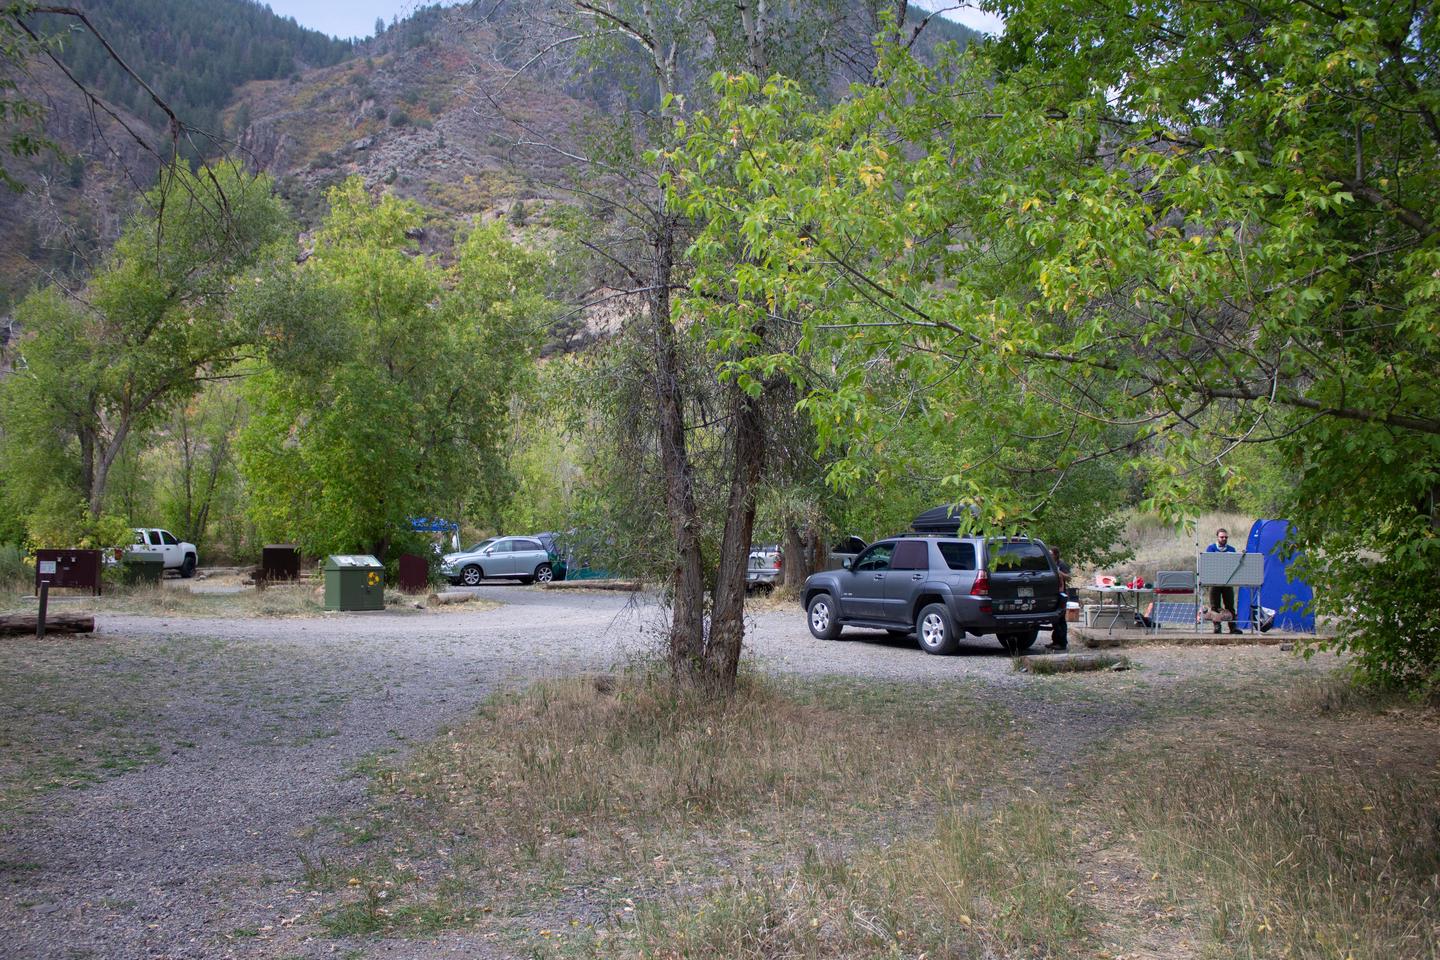 East Portal Campground  - Sites with vehicle accessFive out of the fifteen sites have vehicle access.